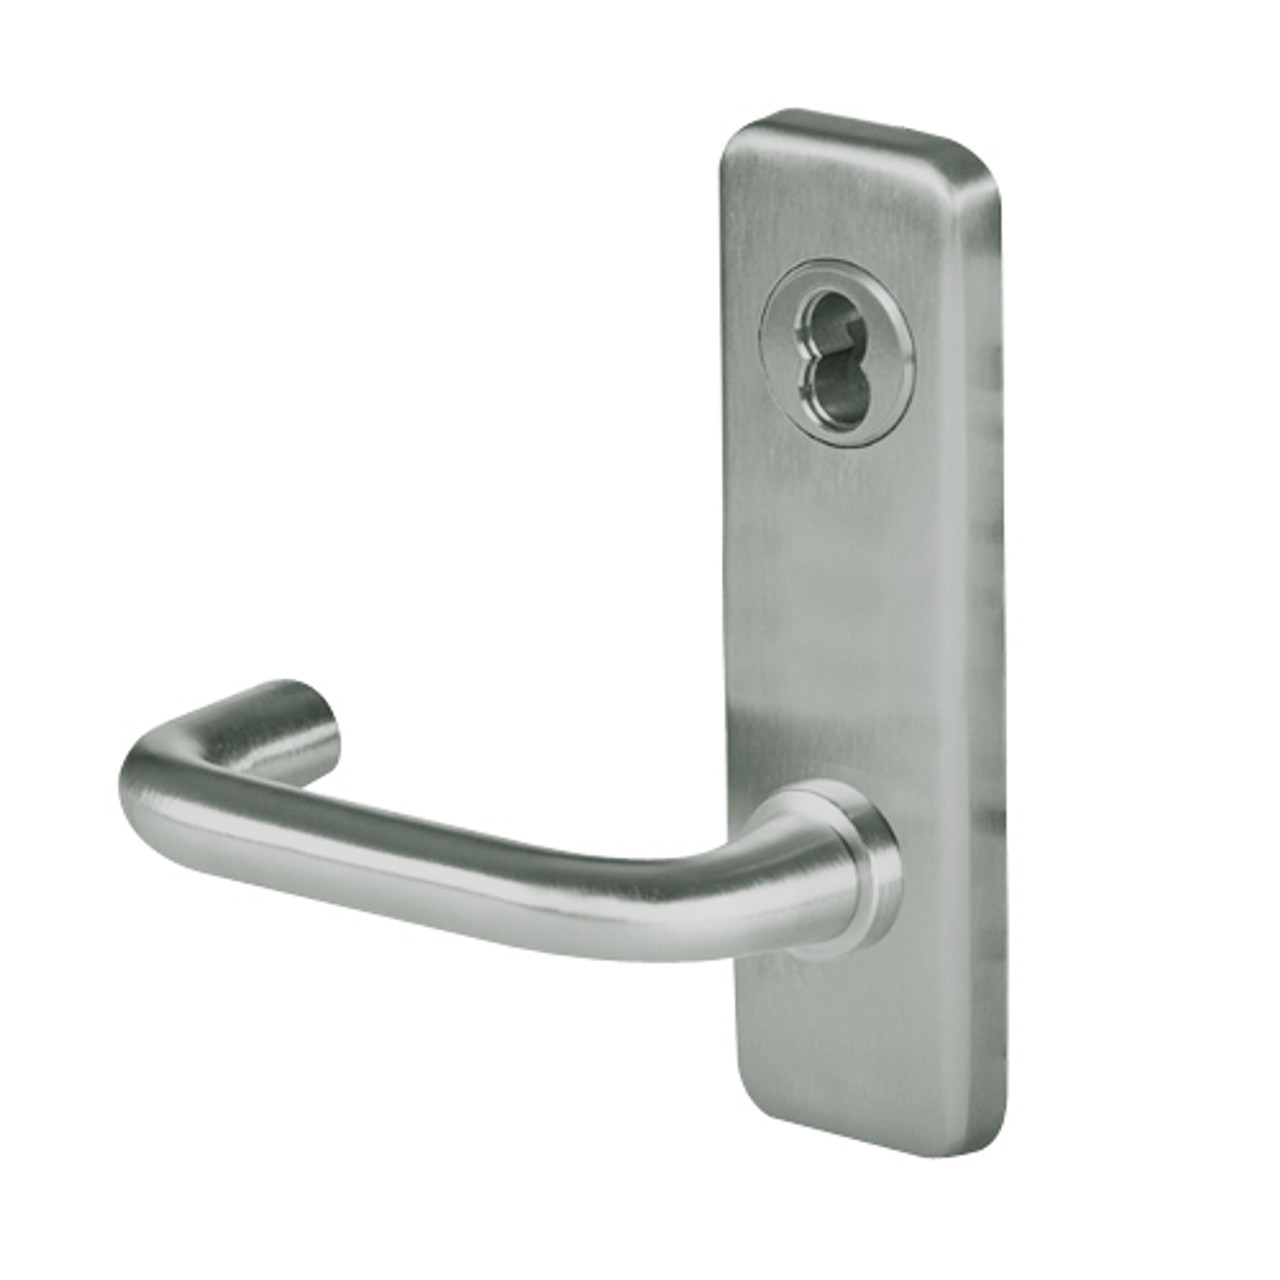 45H0LT3J619 Best 40H Series Privacy Heavy Duty Mortise Lever Lock with Solid Tube Return Style in Satin Nickel